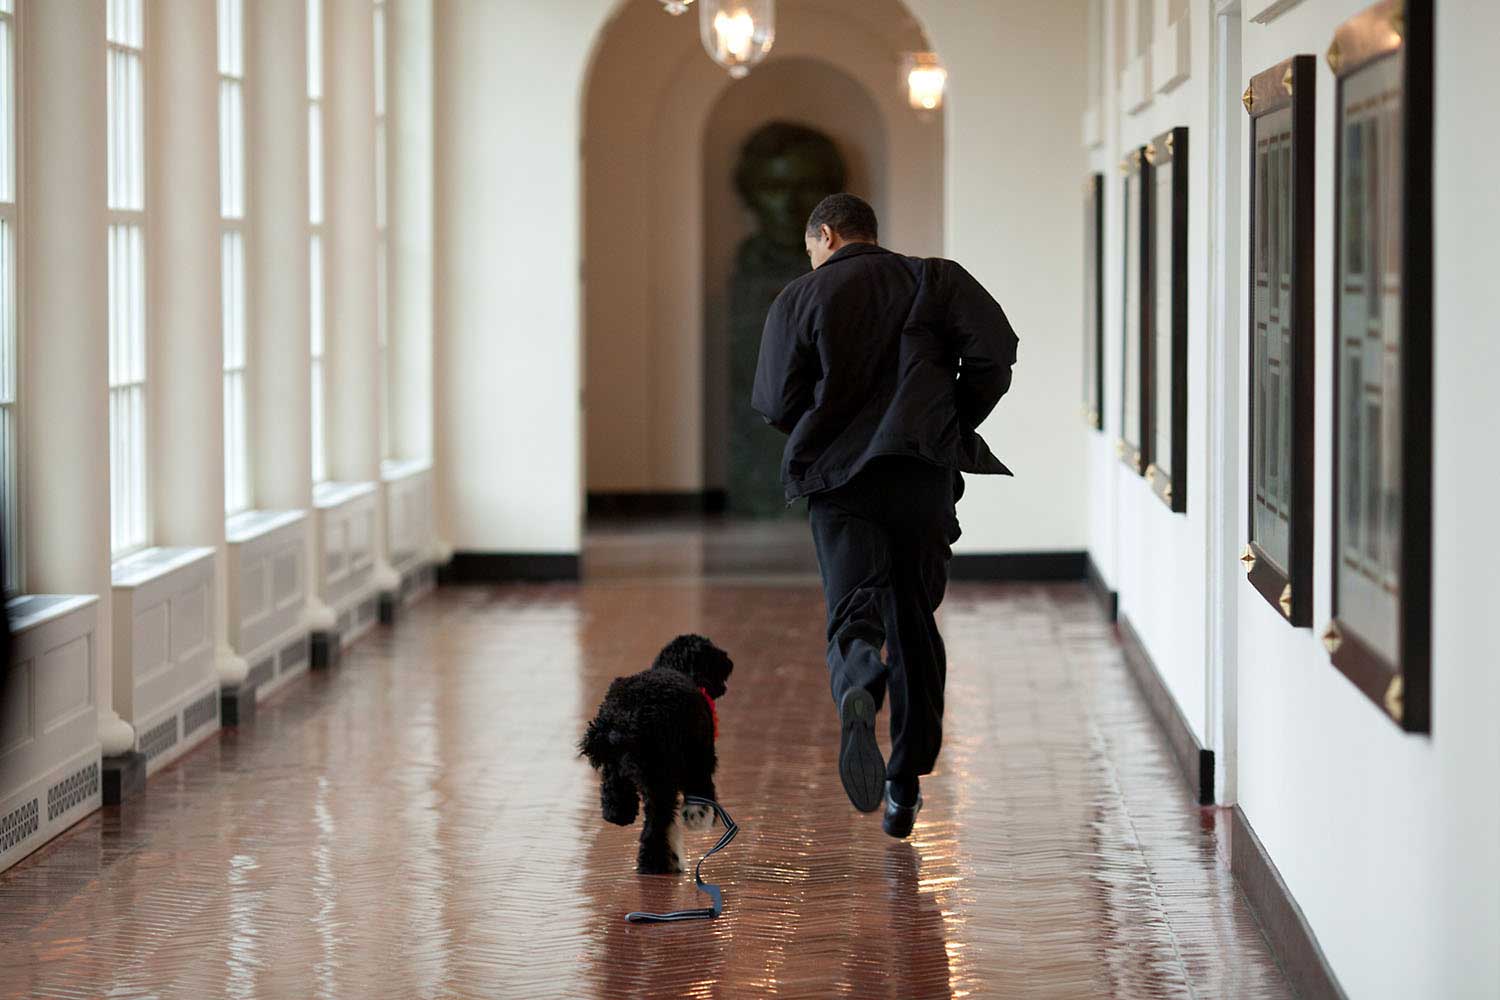 “The Obama family was introduced to a prospective family dog at a secret greet on March 15, 2009. After spending about an hour with the dog, the family decided he was the one. Here, the dog ran alongside the President in an East Wing hallway. The dog returned to his trainer, while the Obamas embarked on their first international trip. I had to keep these photos secret until a few weeks later, when the dog was brought ‘home’ to the White House and introduced to the world as Bo.”